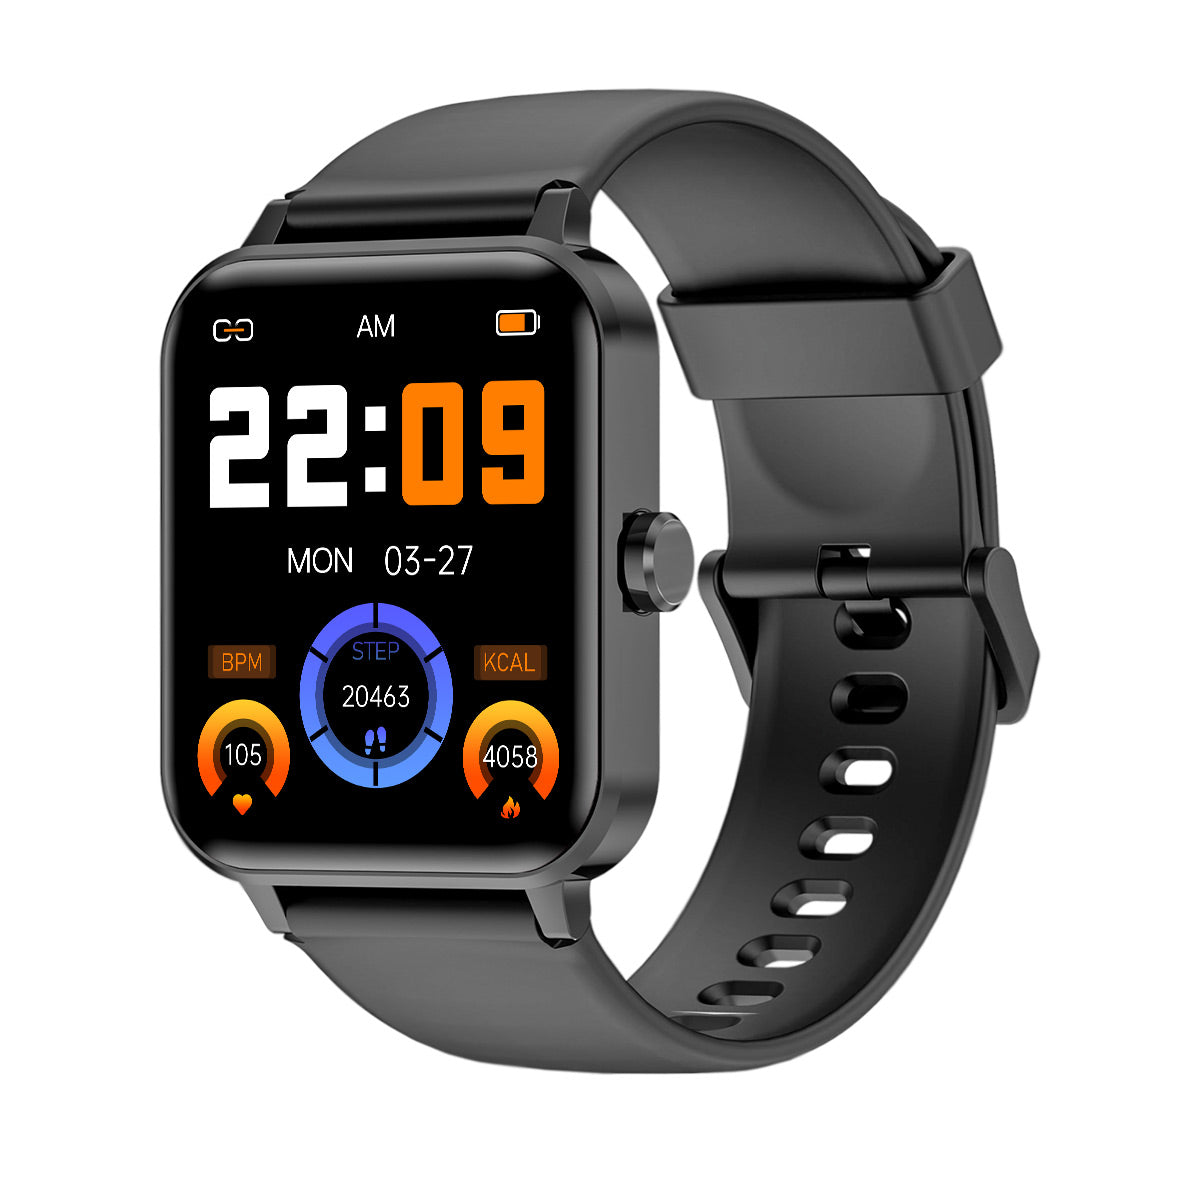 BLACKVIEW Smartwatch: Durable Android Wearable